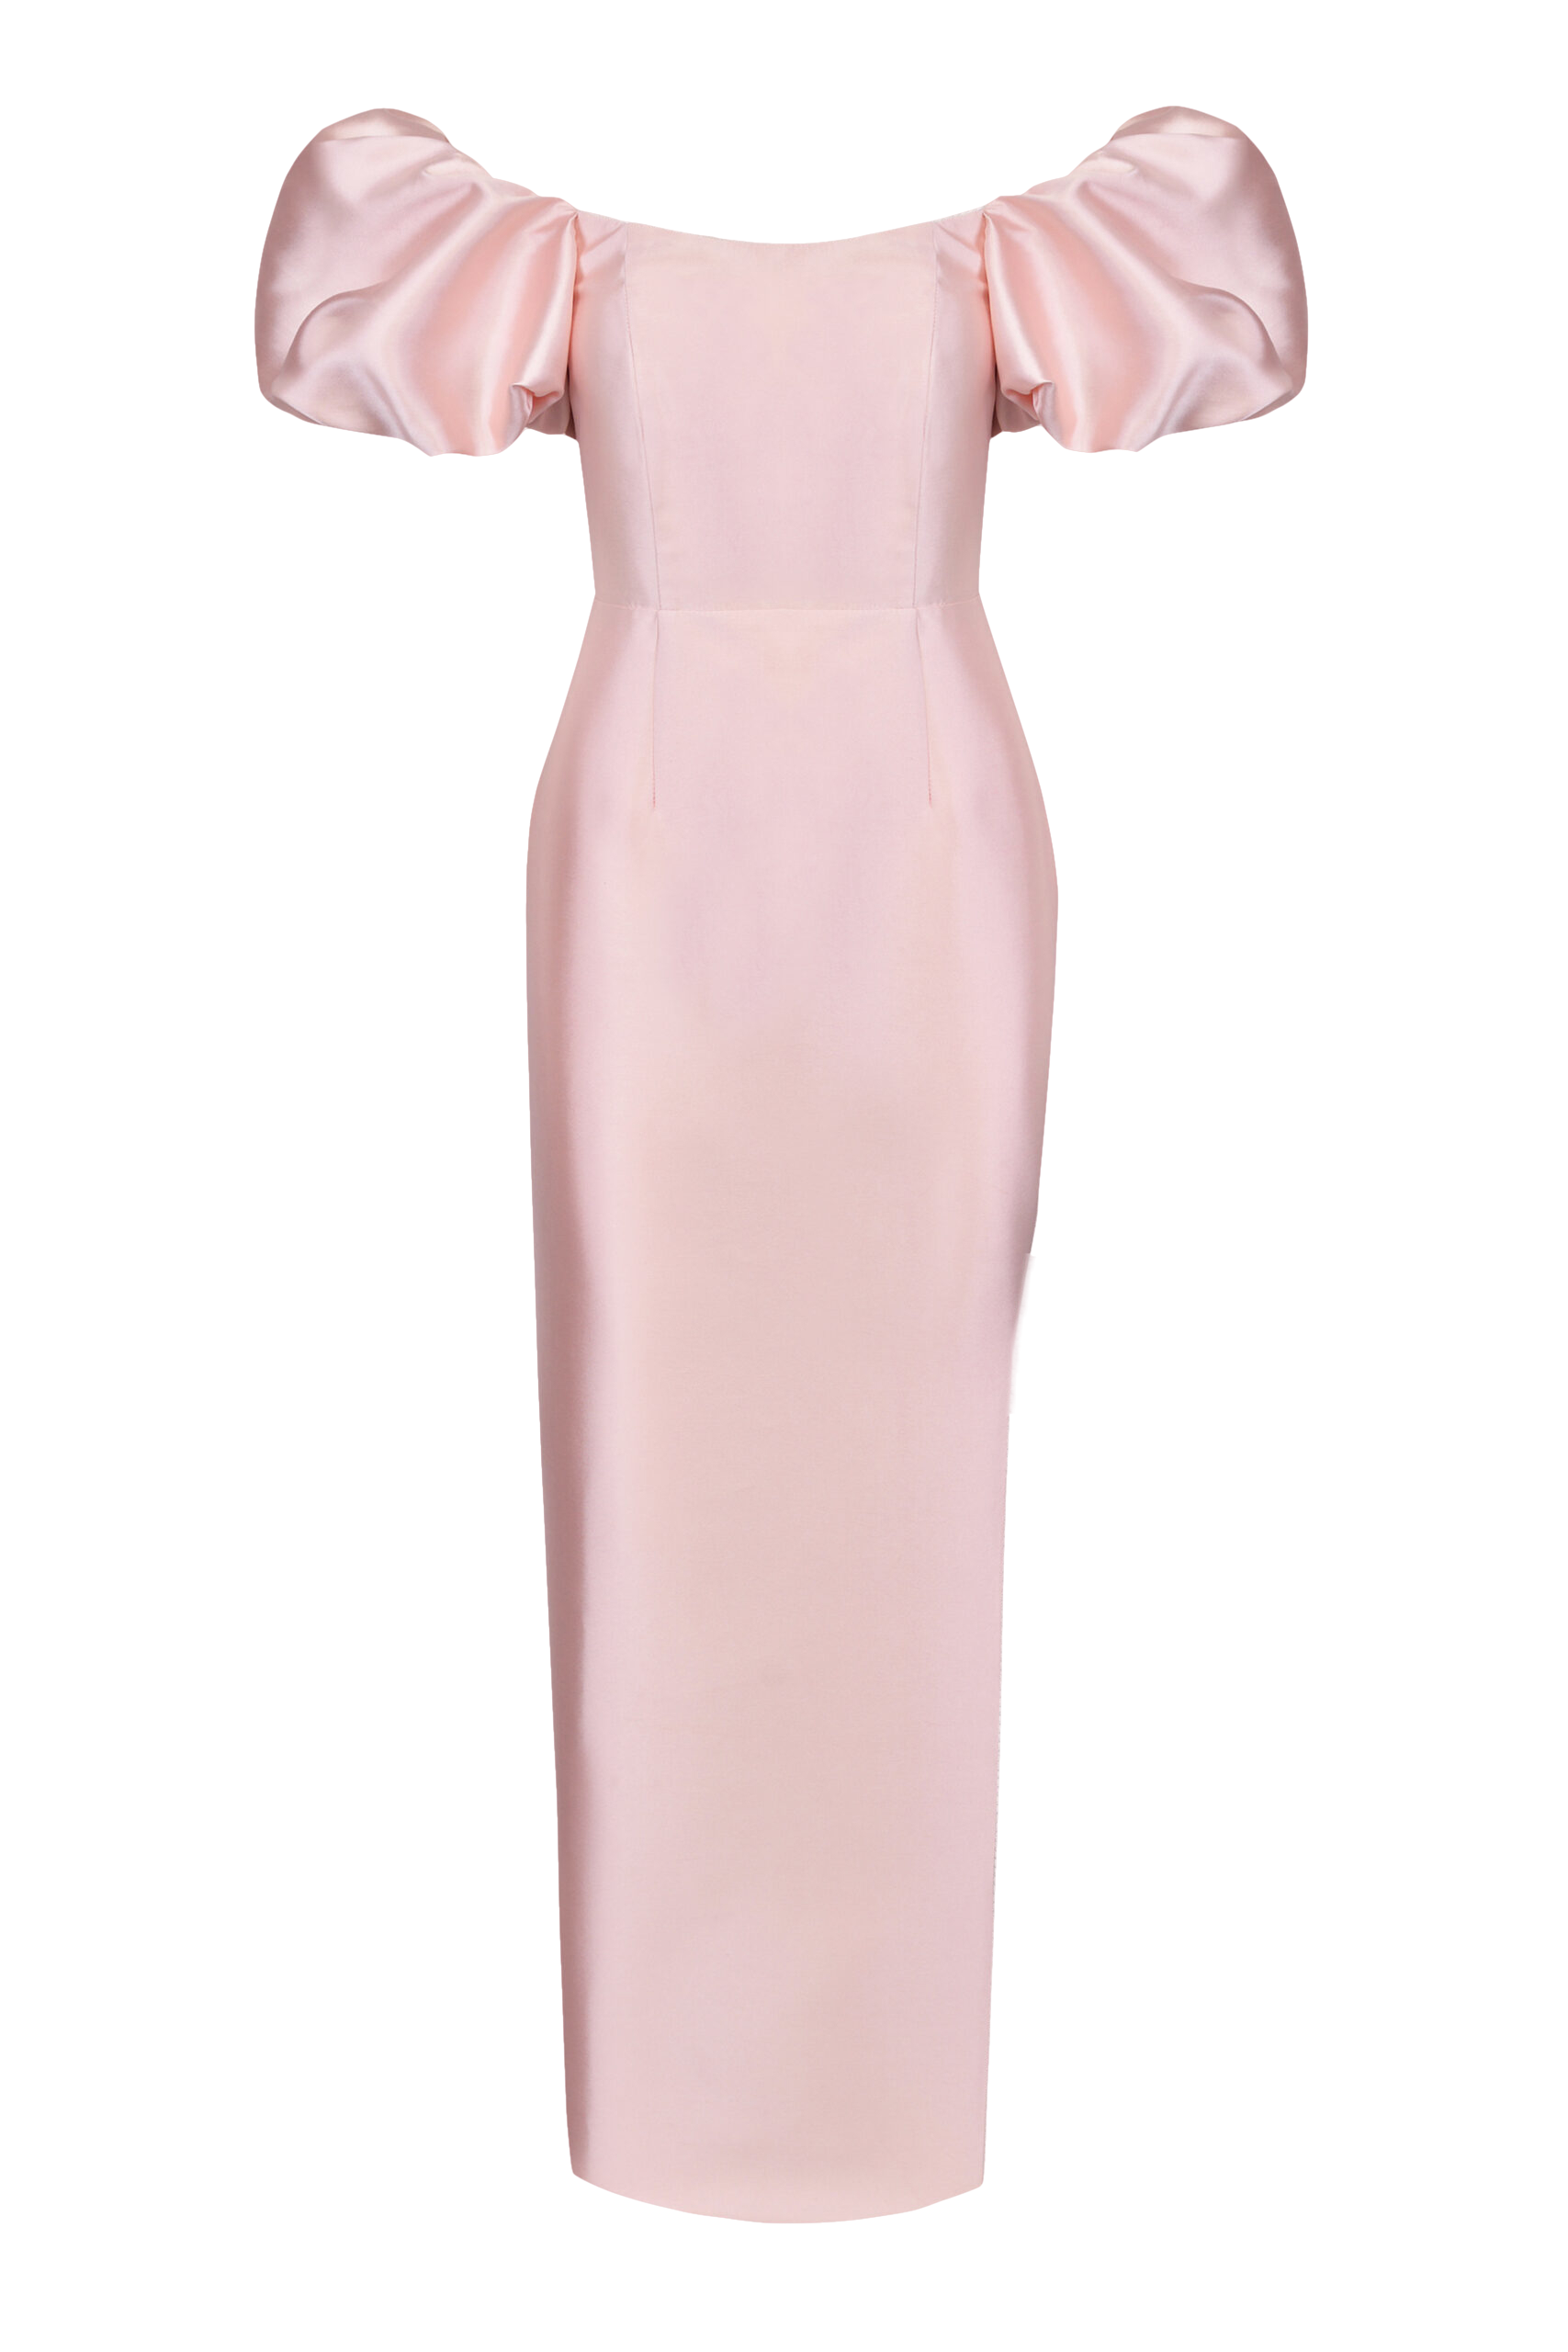 Formal dress in the color of powder pink with pearls von Lily Was Here